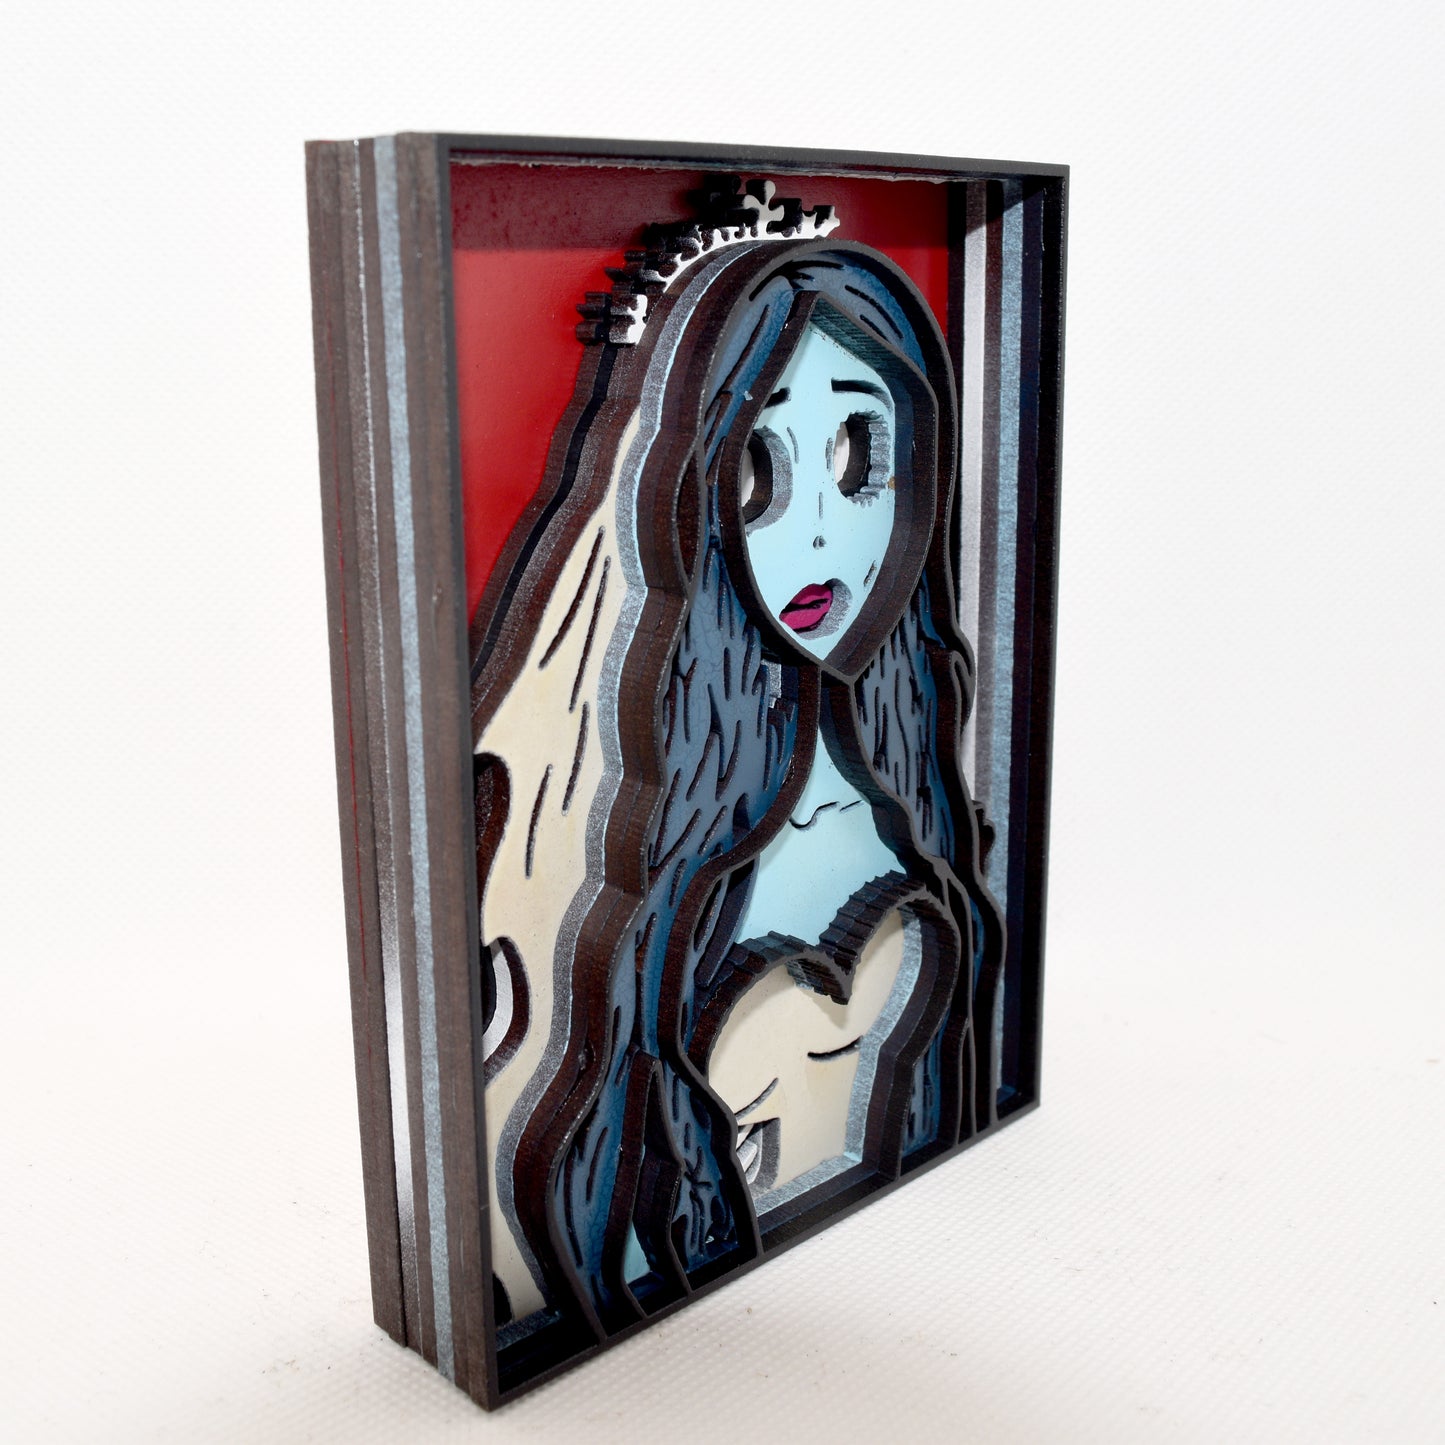 3-D Layered Emily (Corpse Bride) Wooden Art